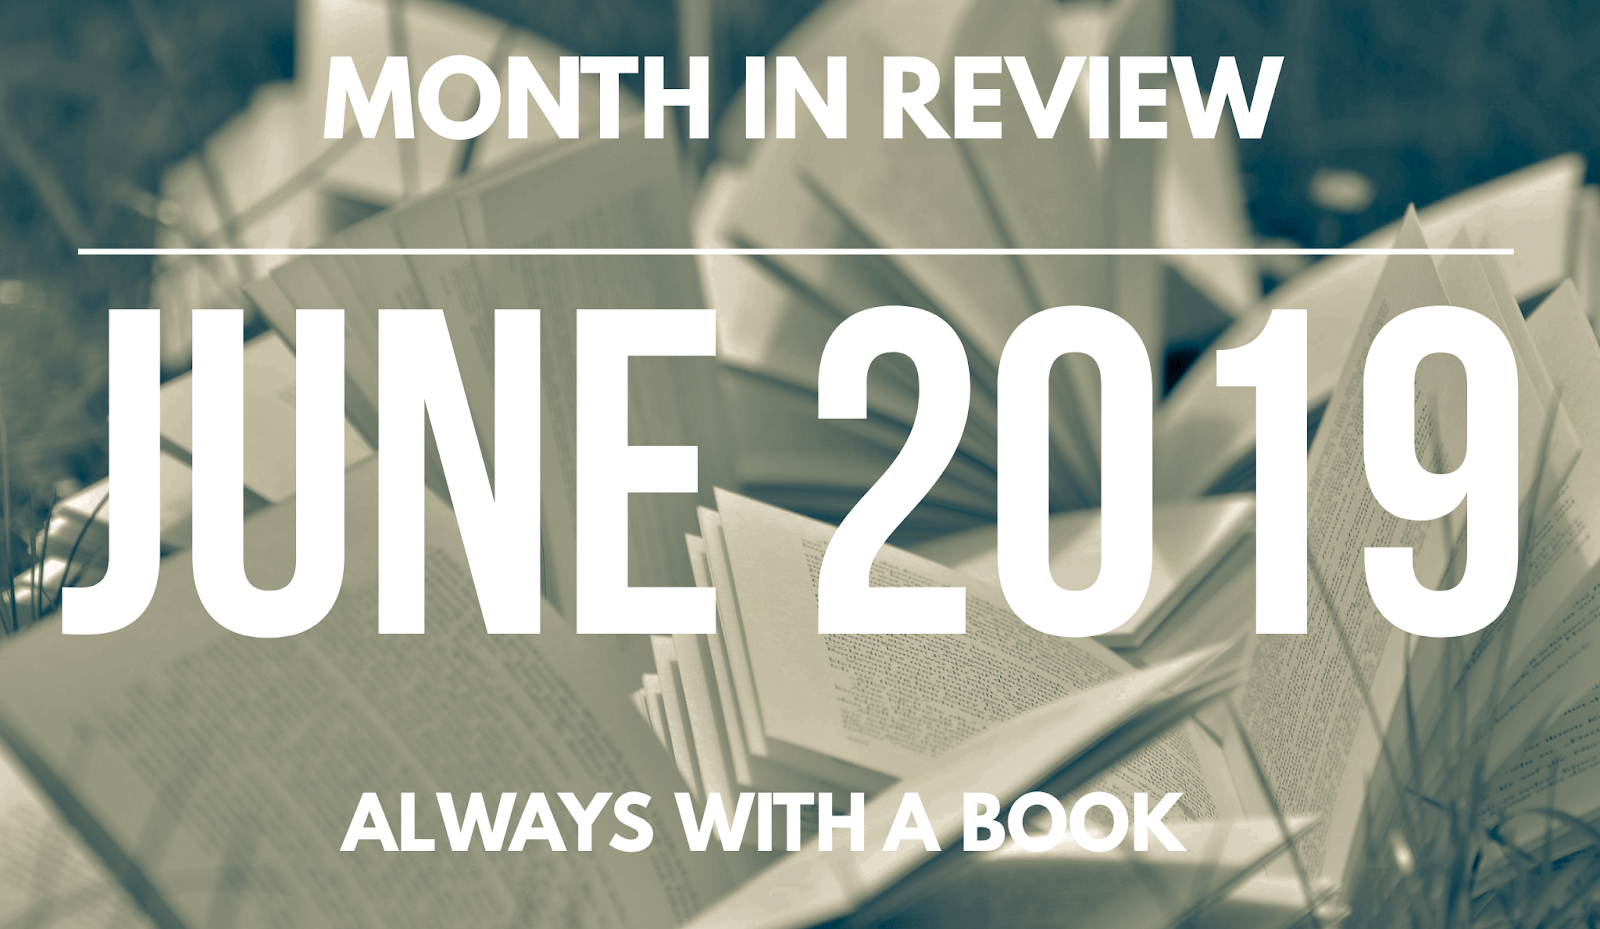 Month in Review: June 2019